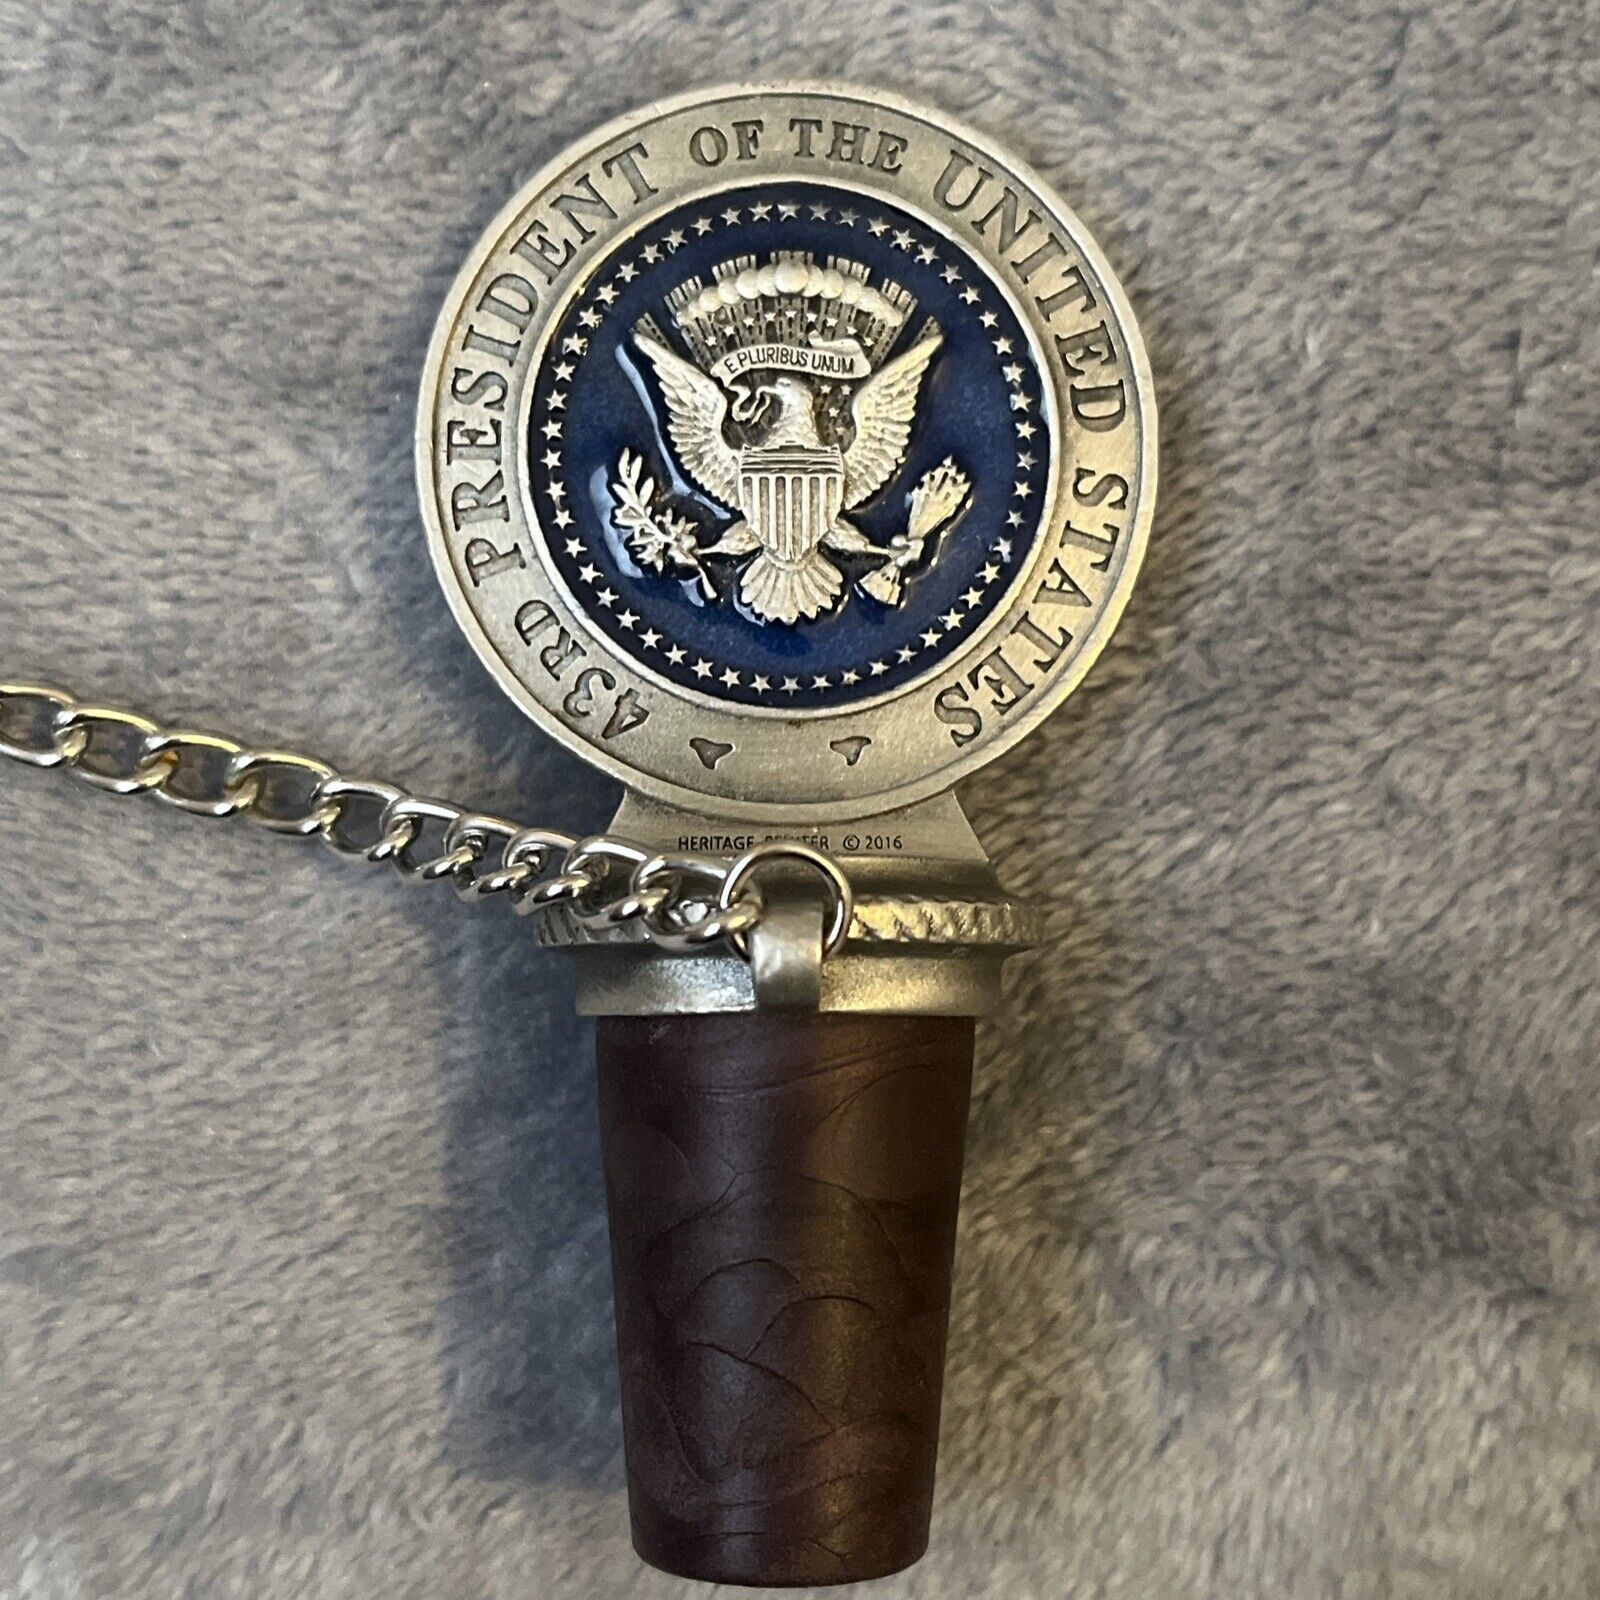 George W Bush Bottle Stopper 43rd President Of The United States 